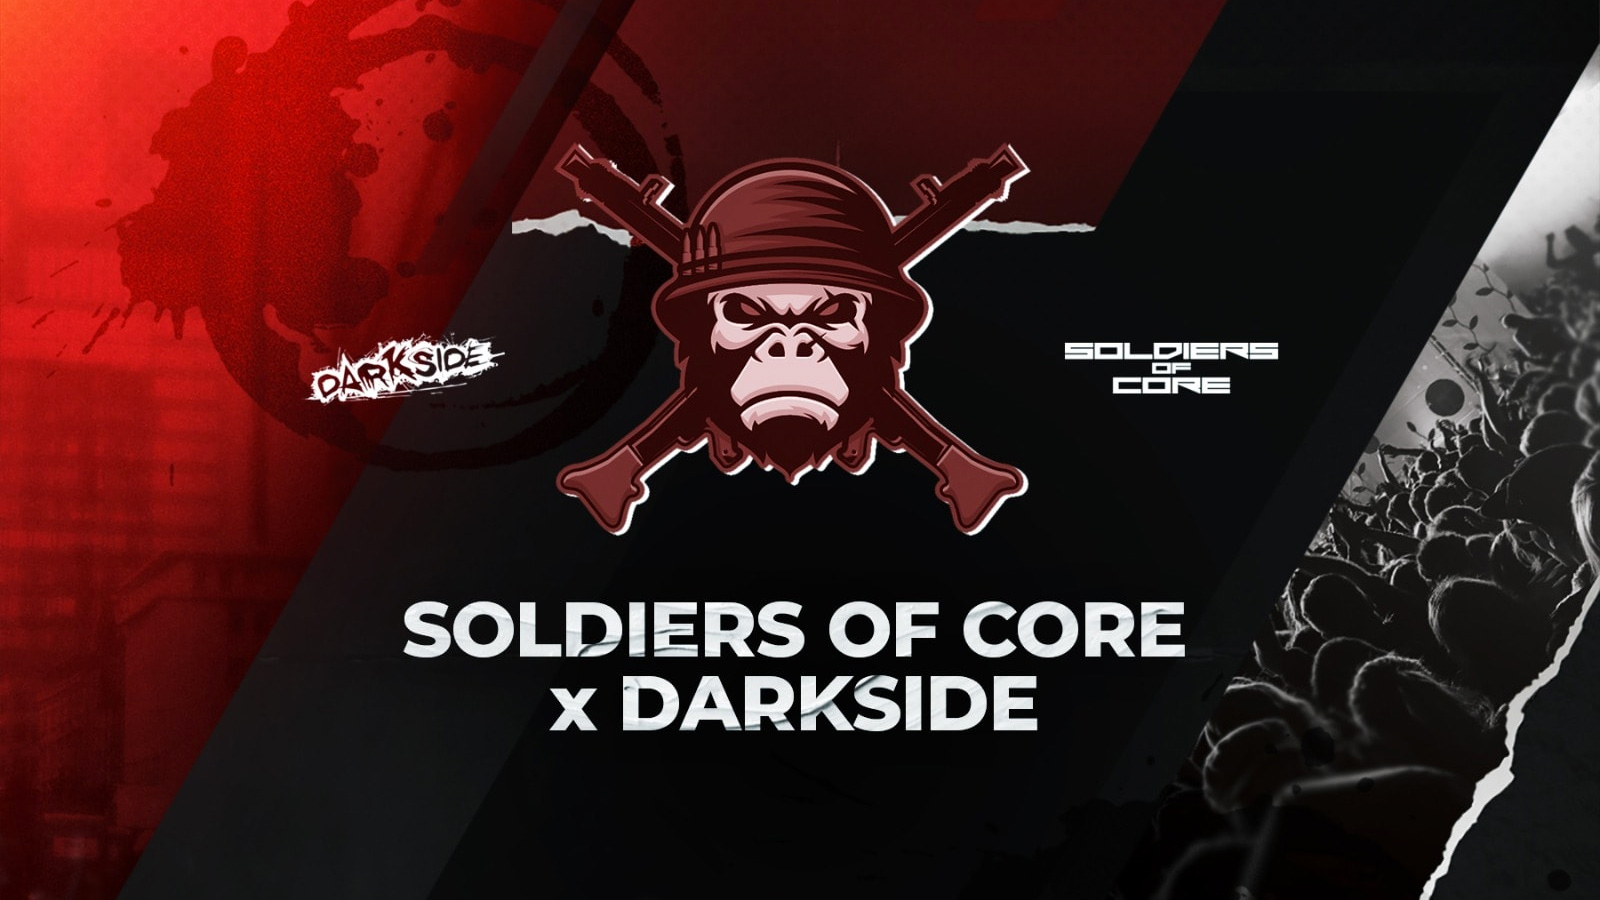 Soldiers Of Core X Darkside At Gorilla Manchester On 31st Jul 2021